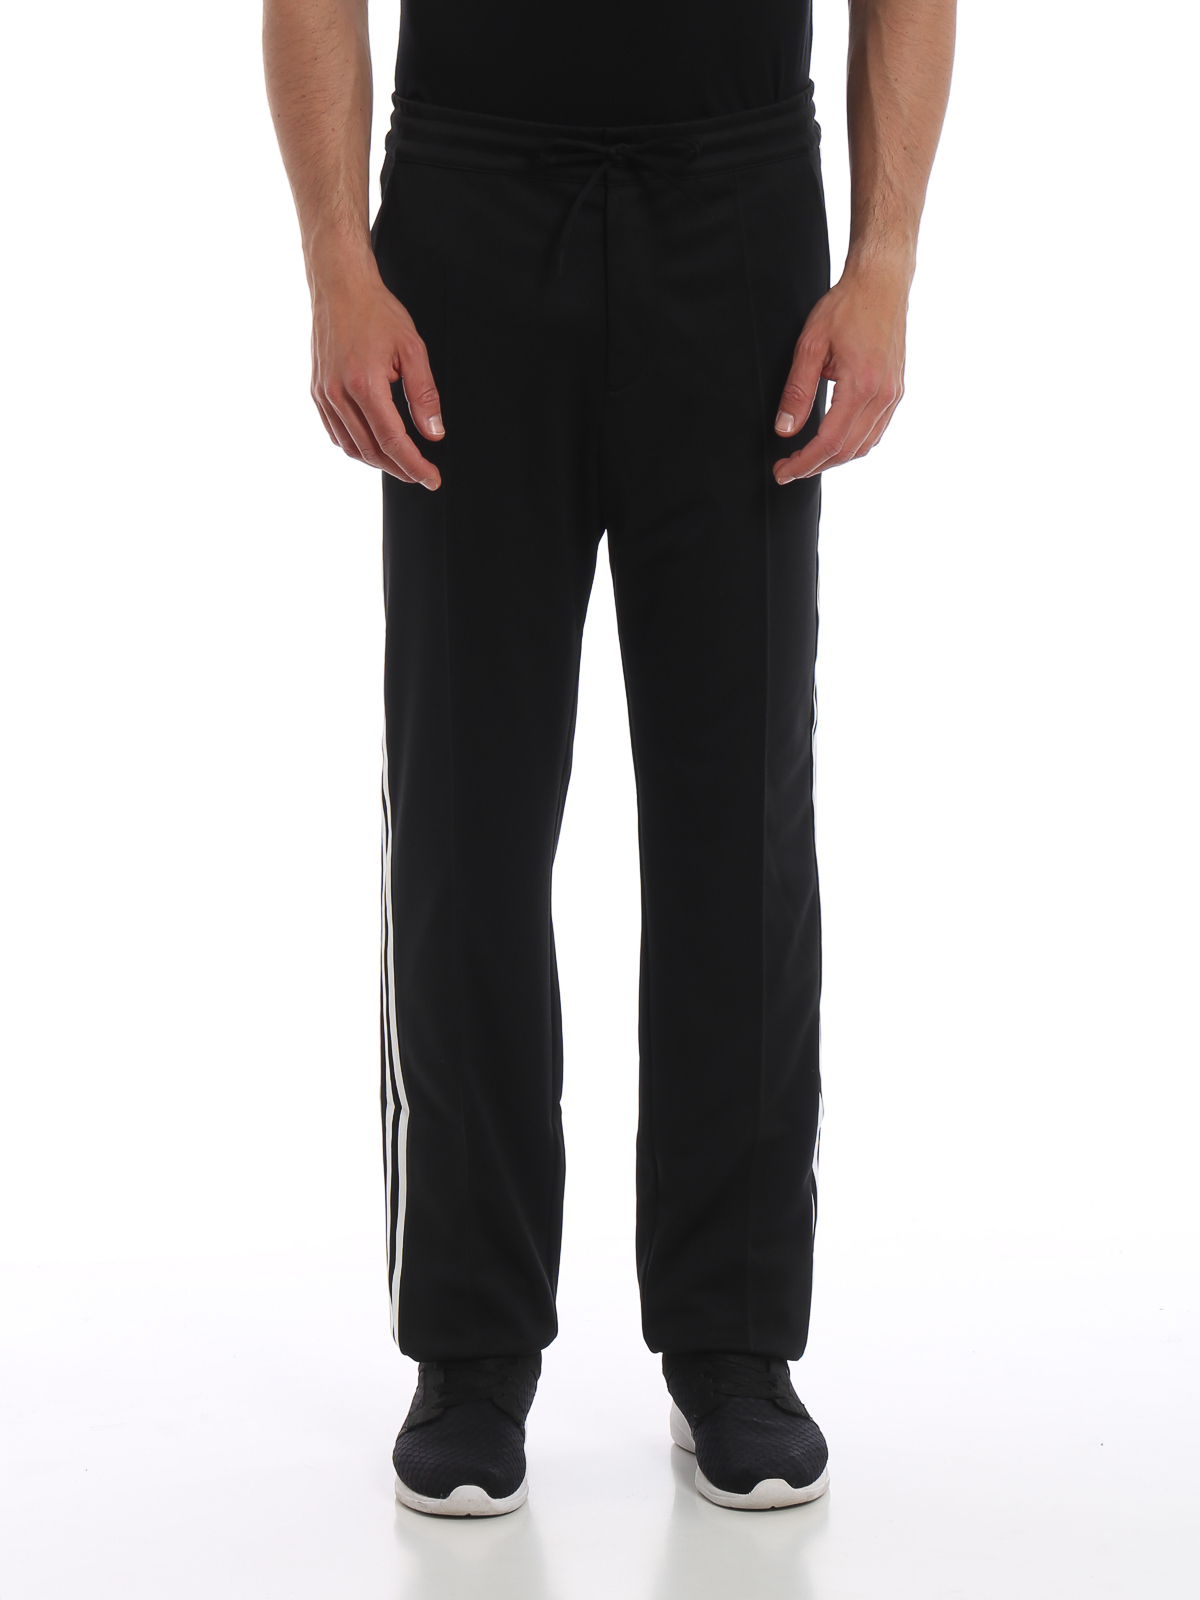 Tracksuit bottoms Adidas Y-3 - M 3S black tracksuit bottoms - DY7295